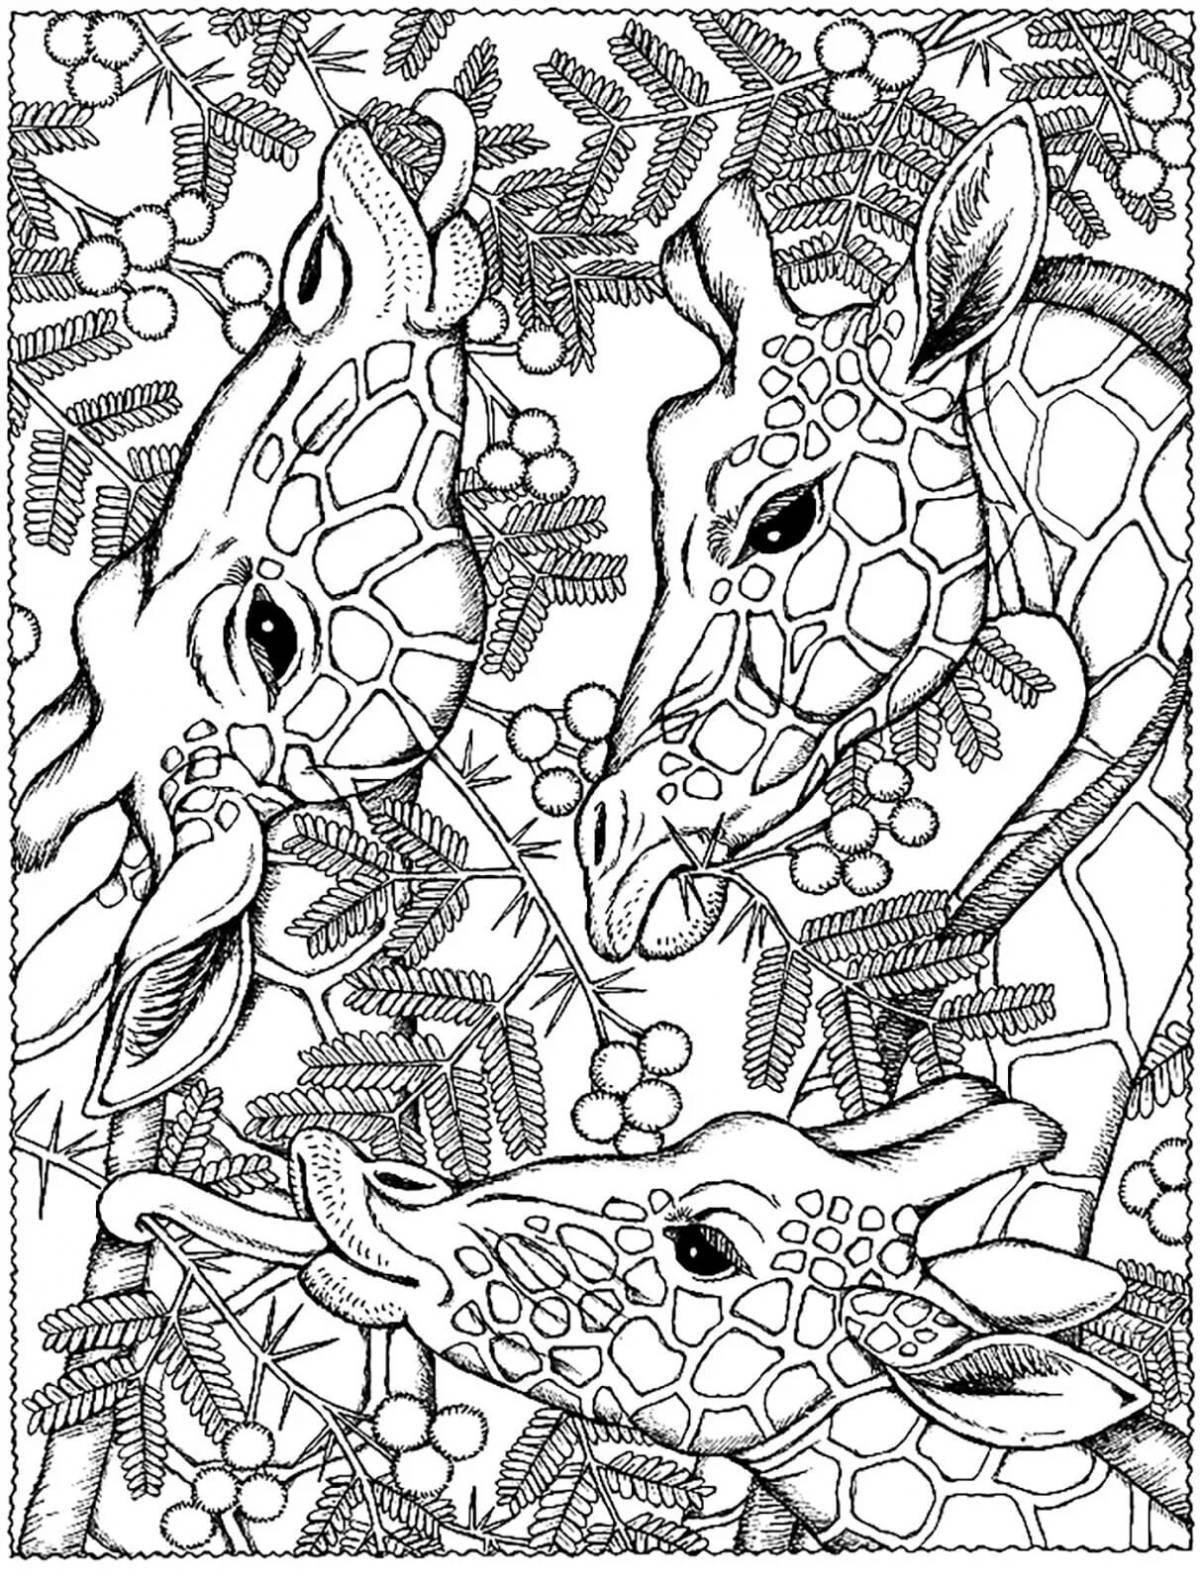 Awesome coloring pages for adults